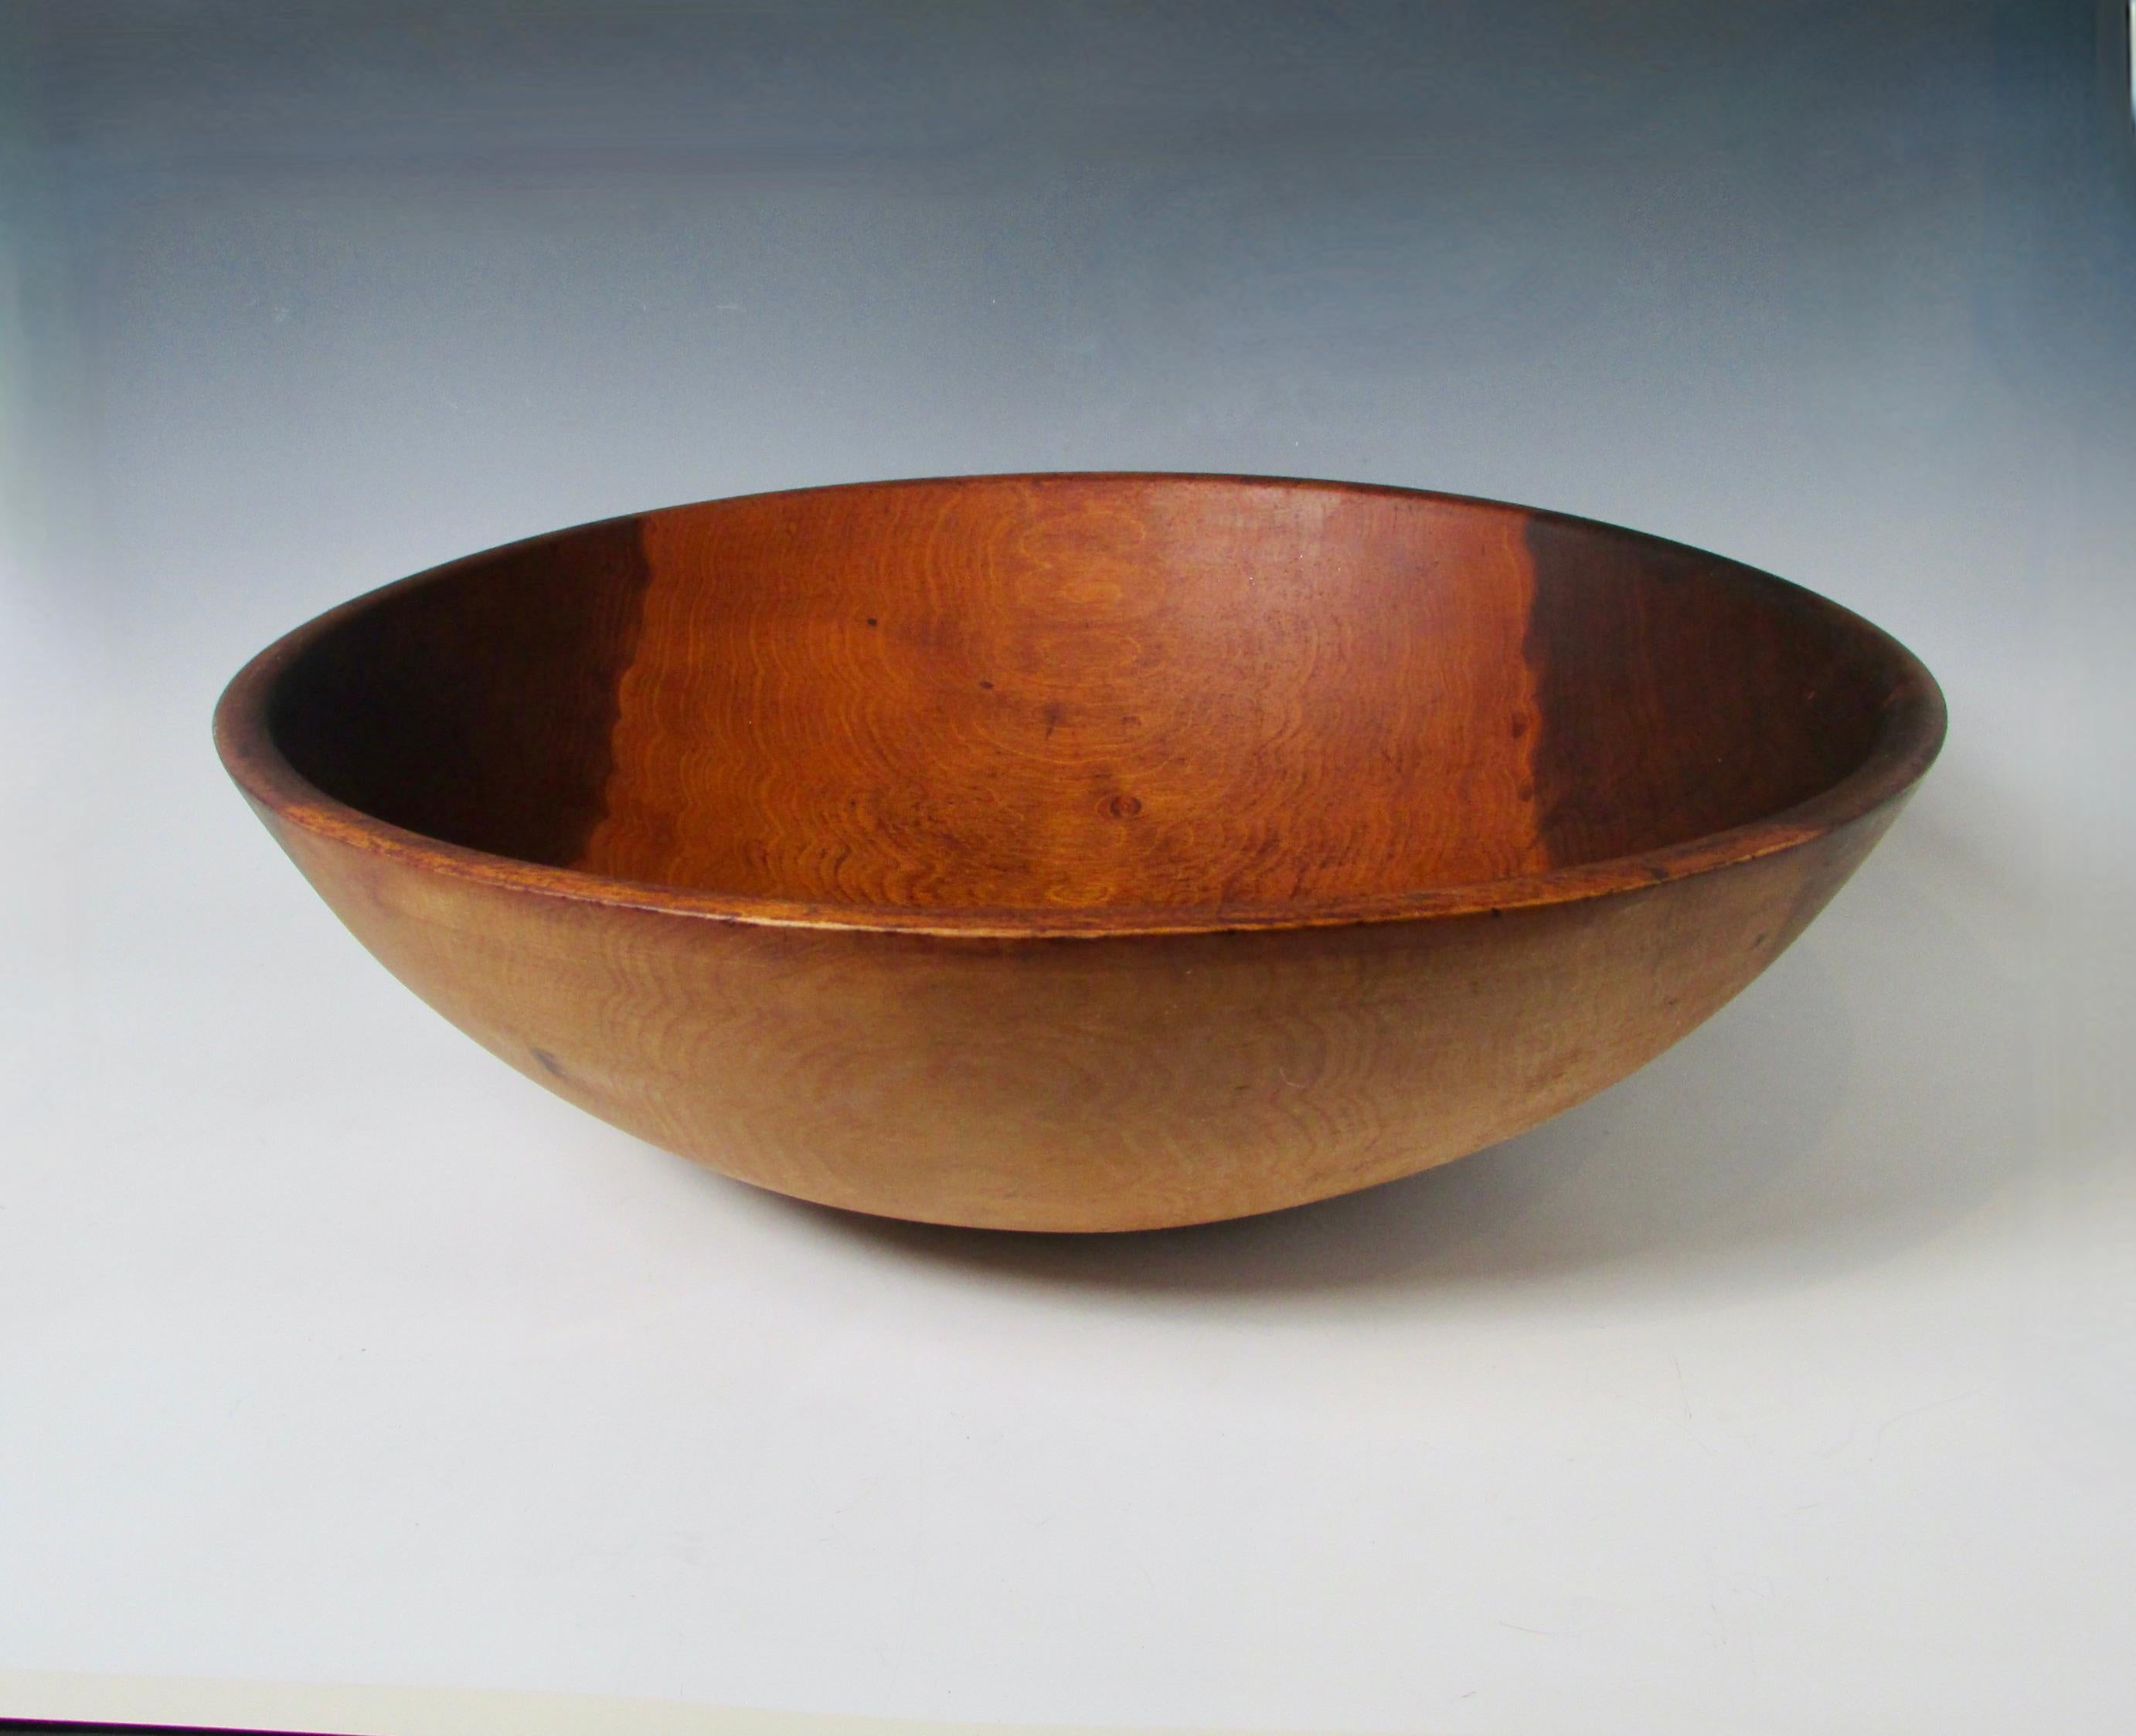 Large bowl with light sap wood and dark edges. Excellent accent for modern design interiors. Flowers gourds glass objects all show well in this organic form.